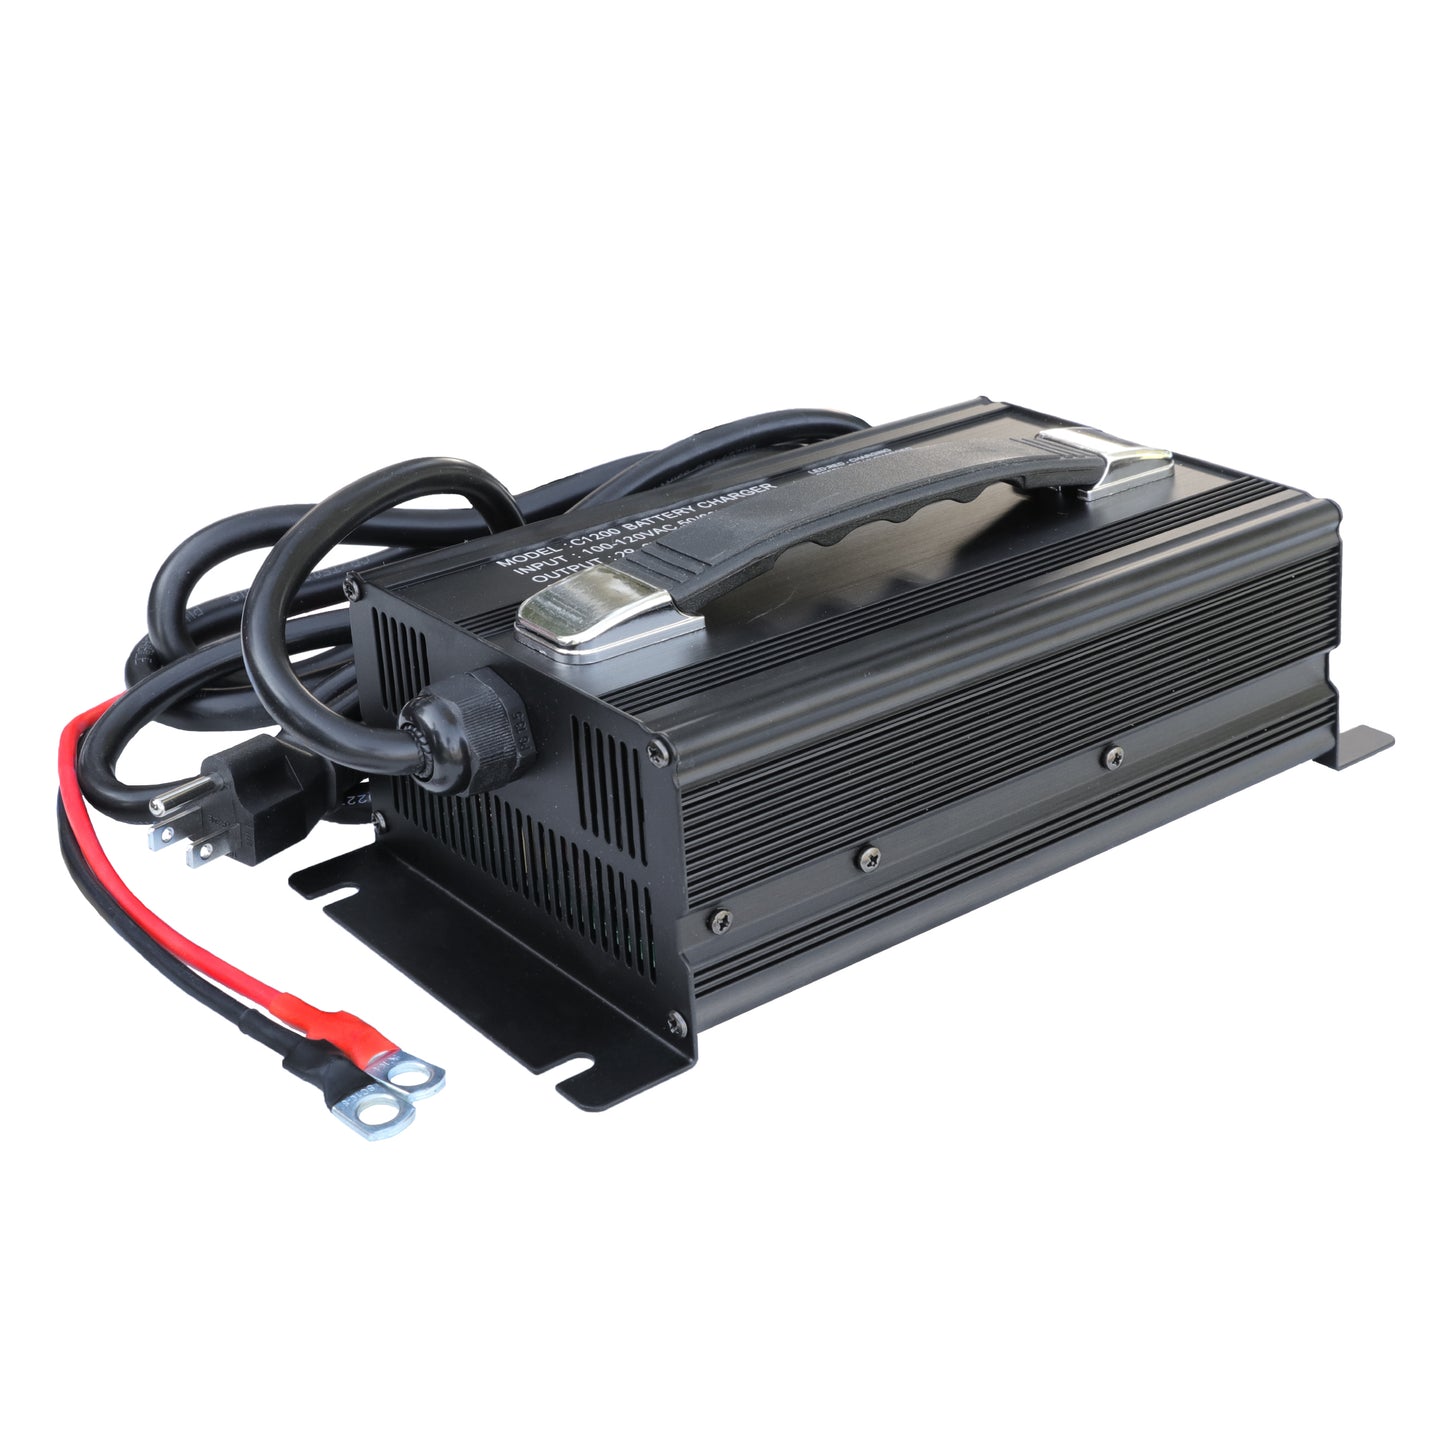 12V 20A On-Board Lithium Battery Charger - Miller Tech